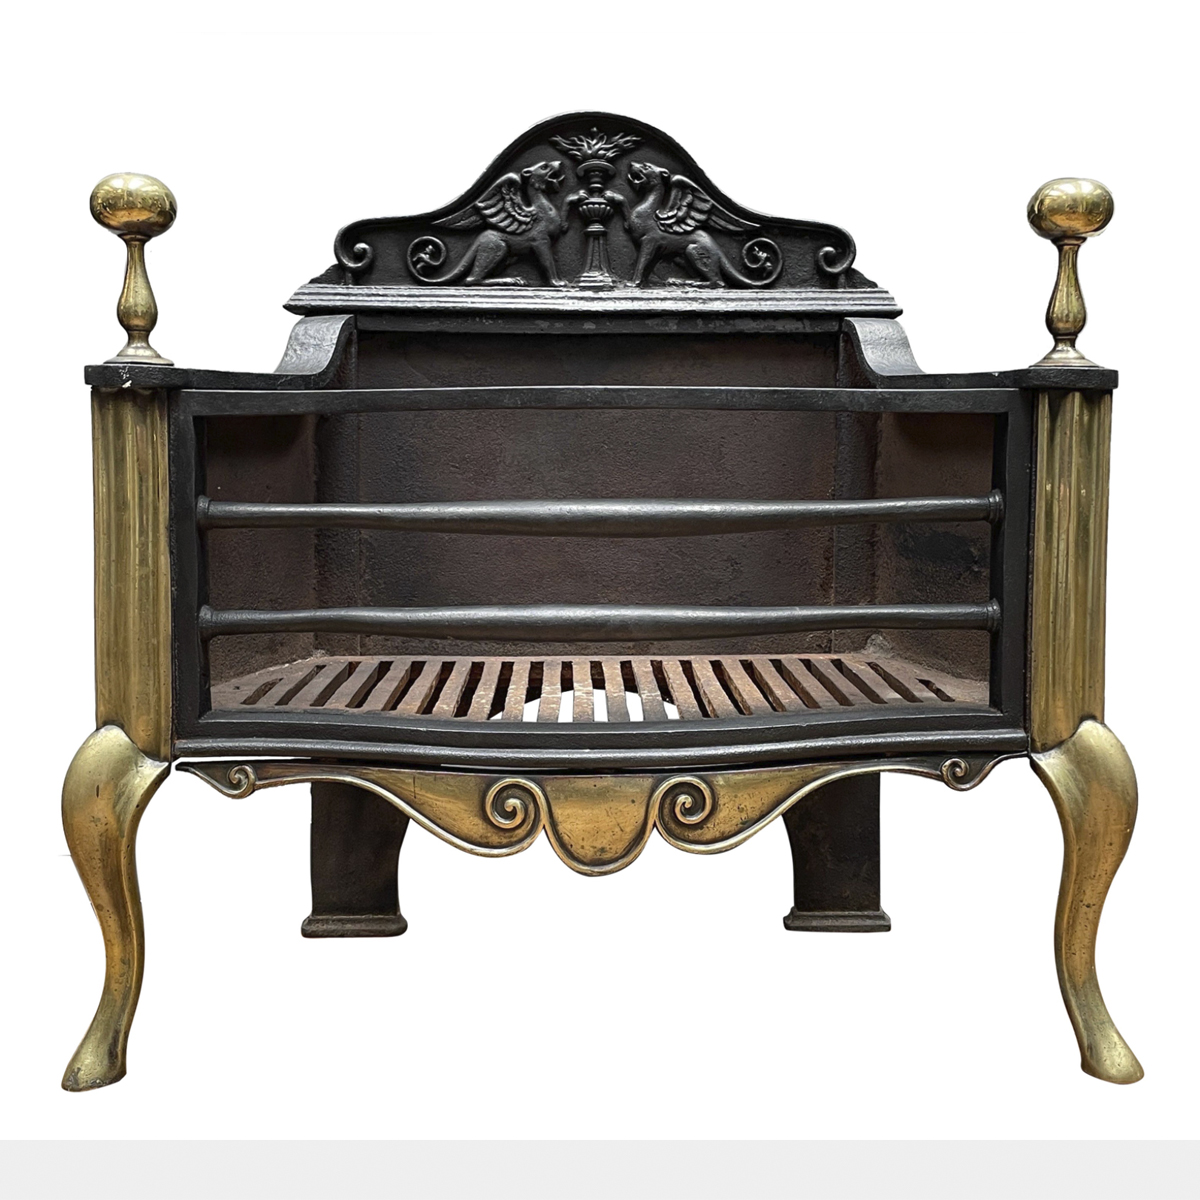 Antique English Fire Grate by Thomas Elsley